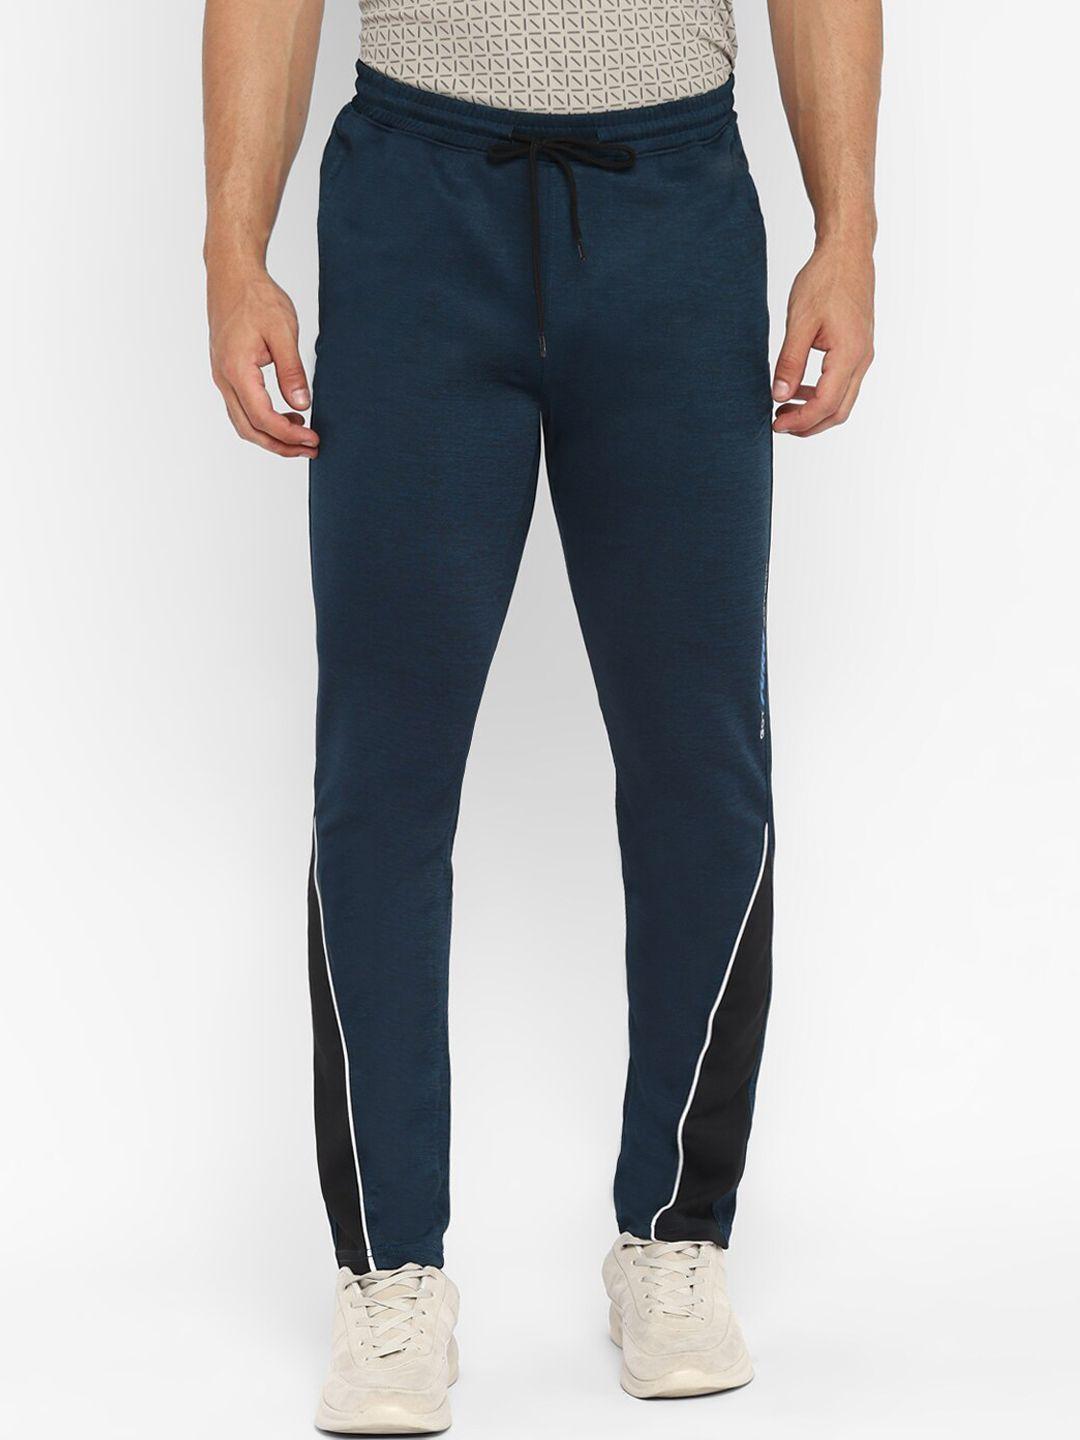 furo-by-red-chief-men-blue-solid-track-pants